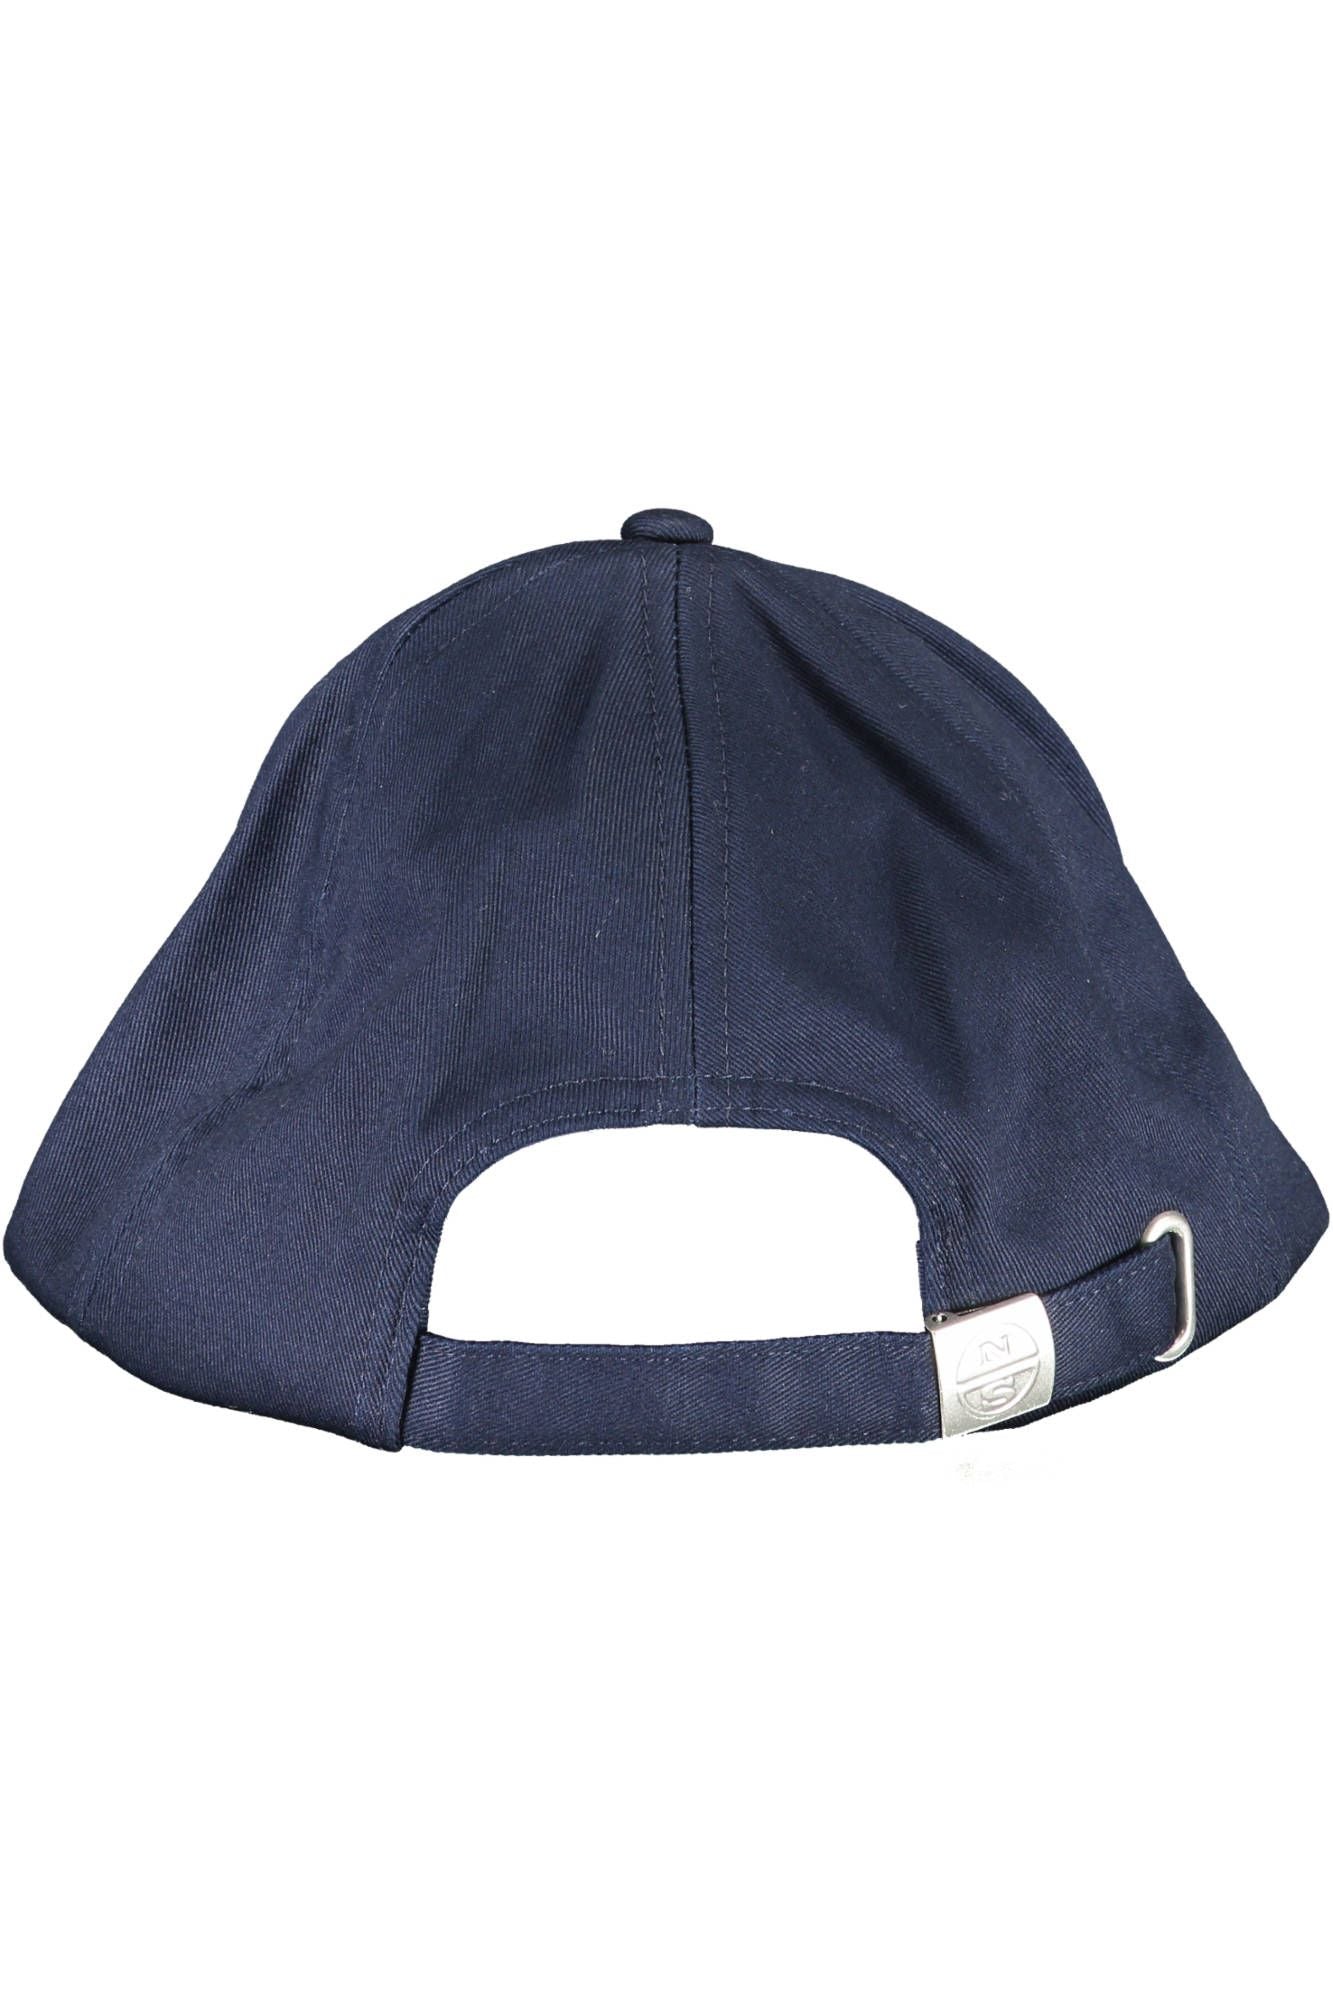 North Sails Chic Blue Embroidered Cotton Cap